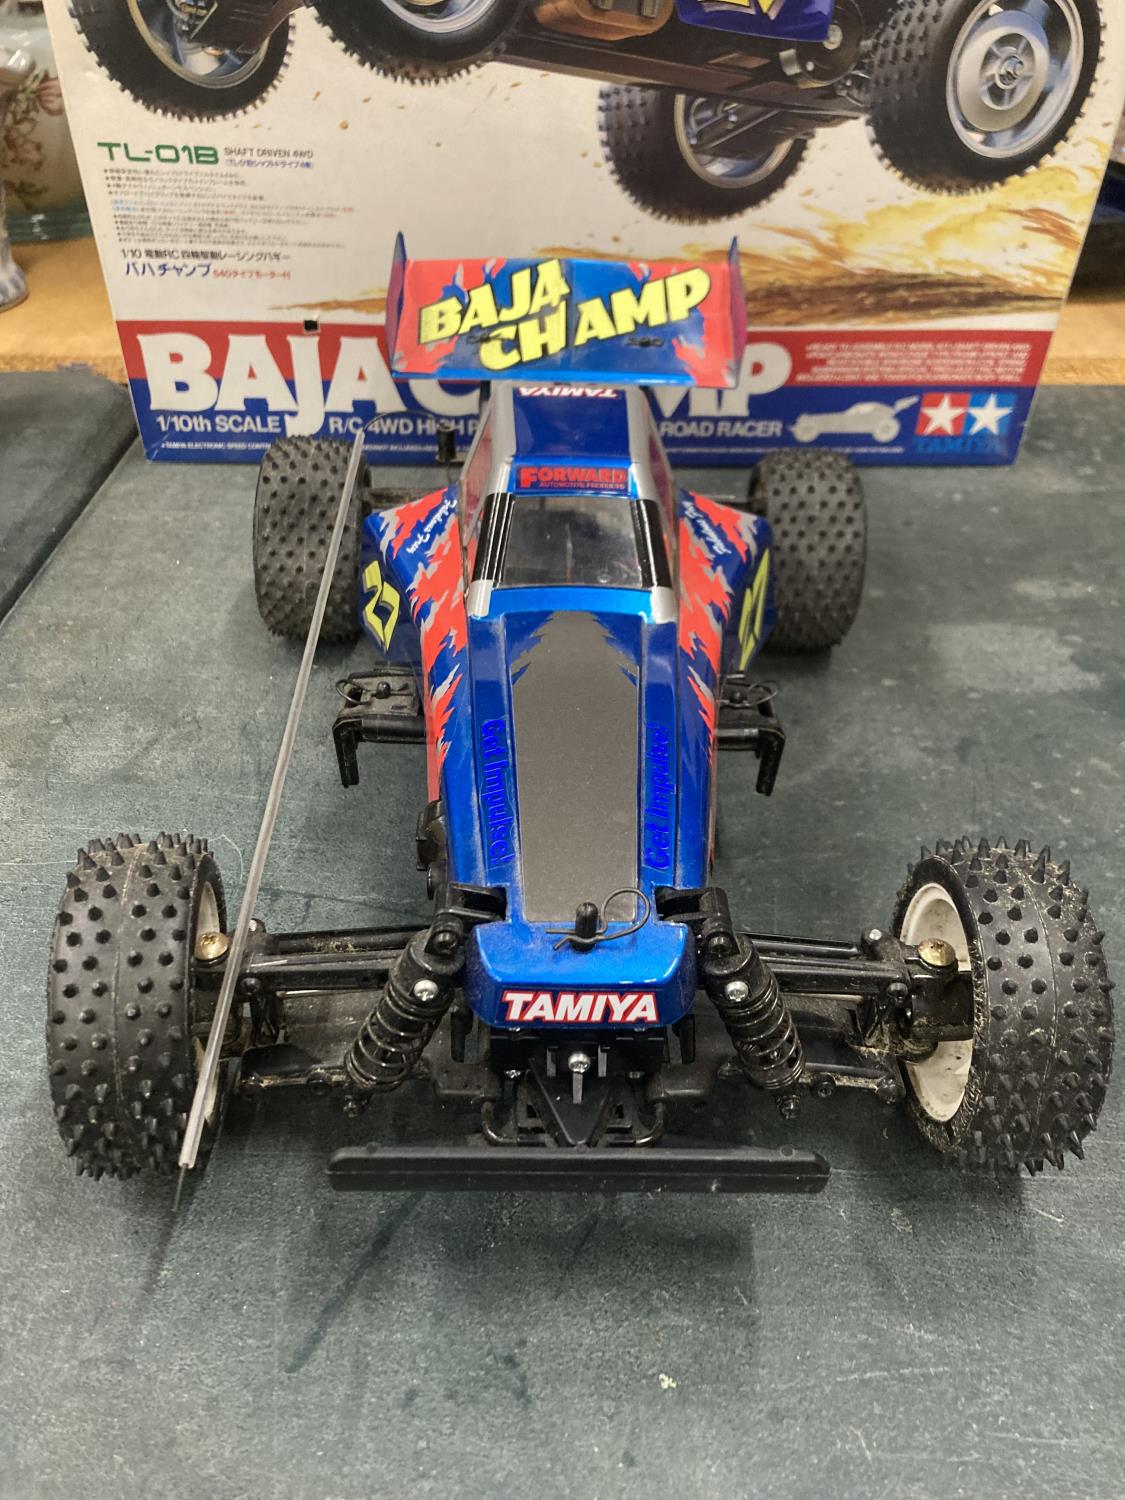 A TAMIYA BAJA CHAMP 1/10TH SCALE R/C 4WD HIGH PERFORMANCE OFF ROAD RACER (NO CONTROLLER PRESENT) - Image 6 of 8